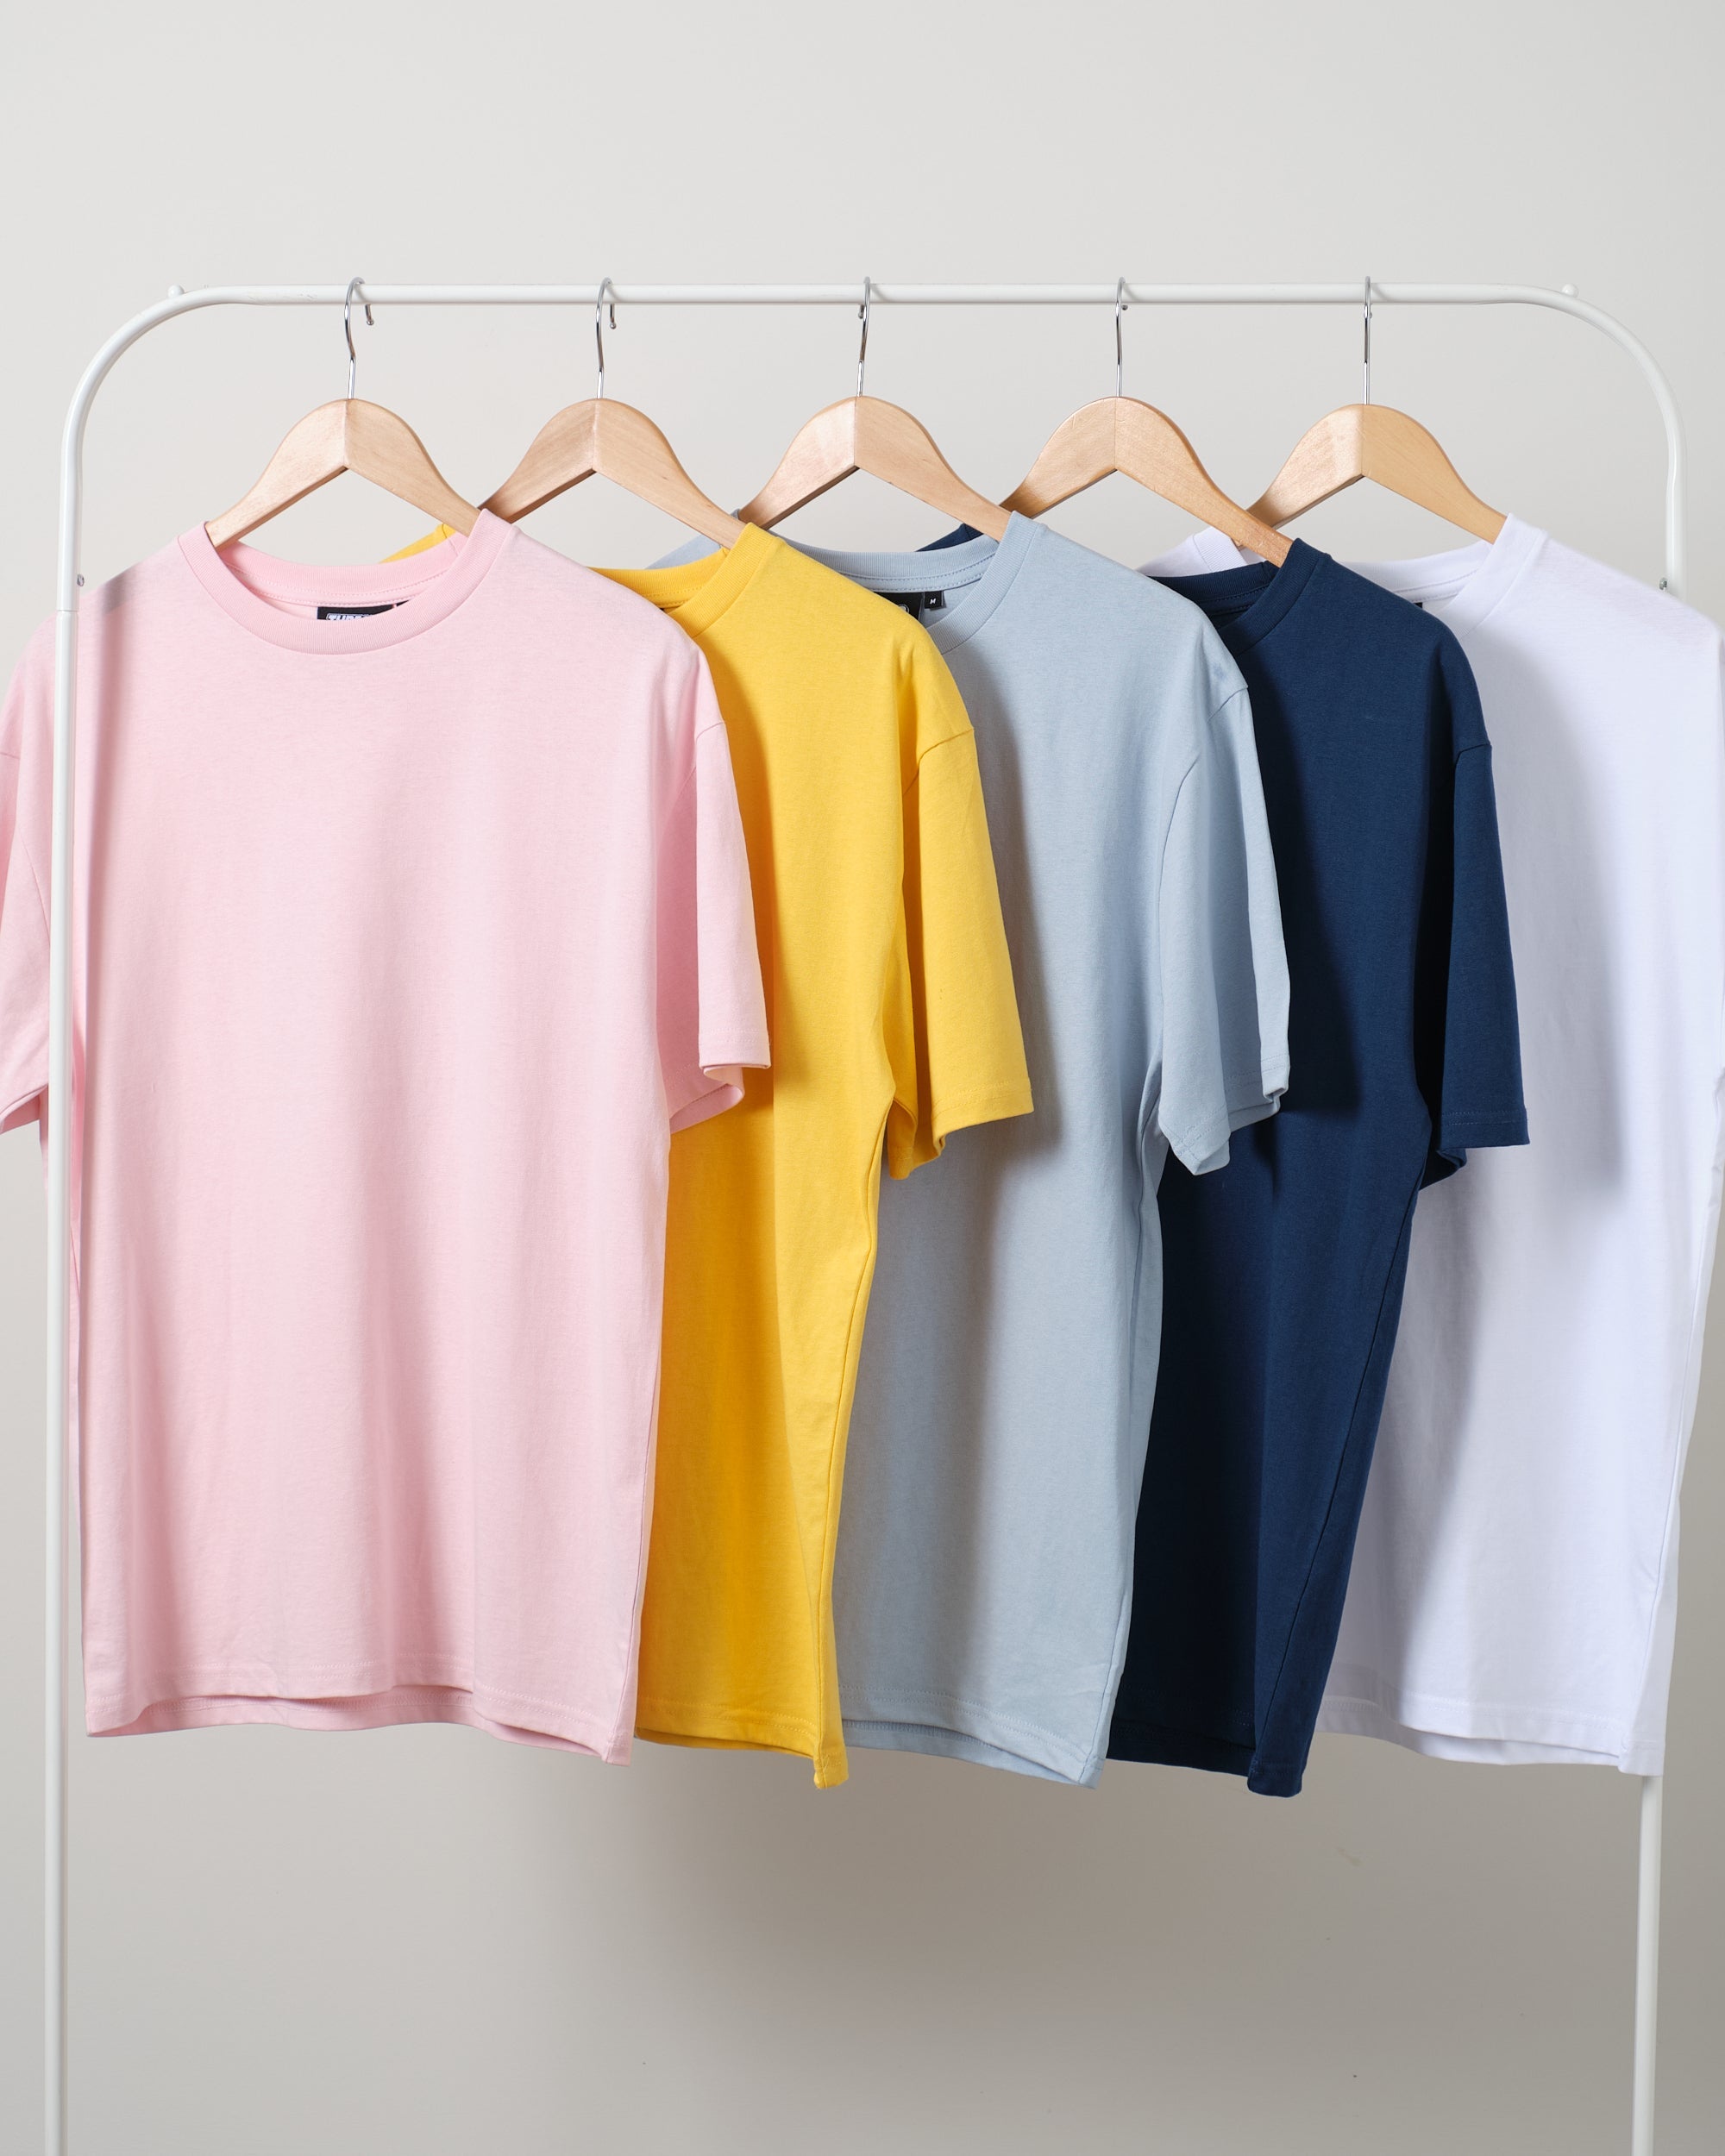 Classic Tee 5 Pack: Pink, Yellow,Pale Blue, Navy, White  Australia Online 